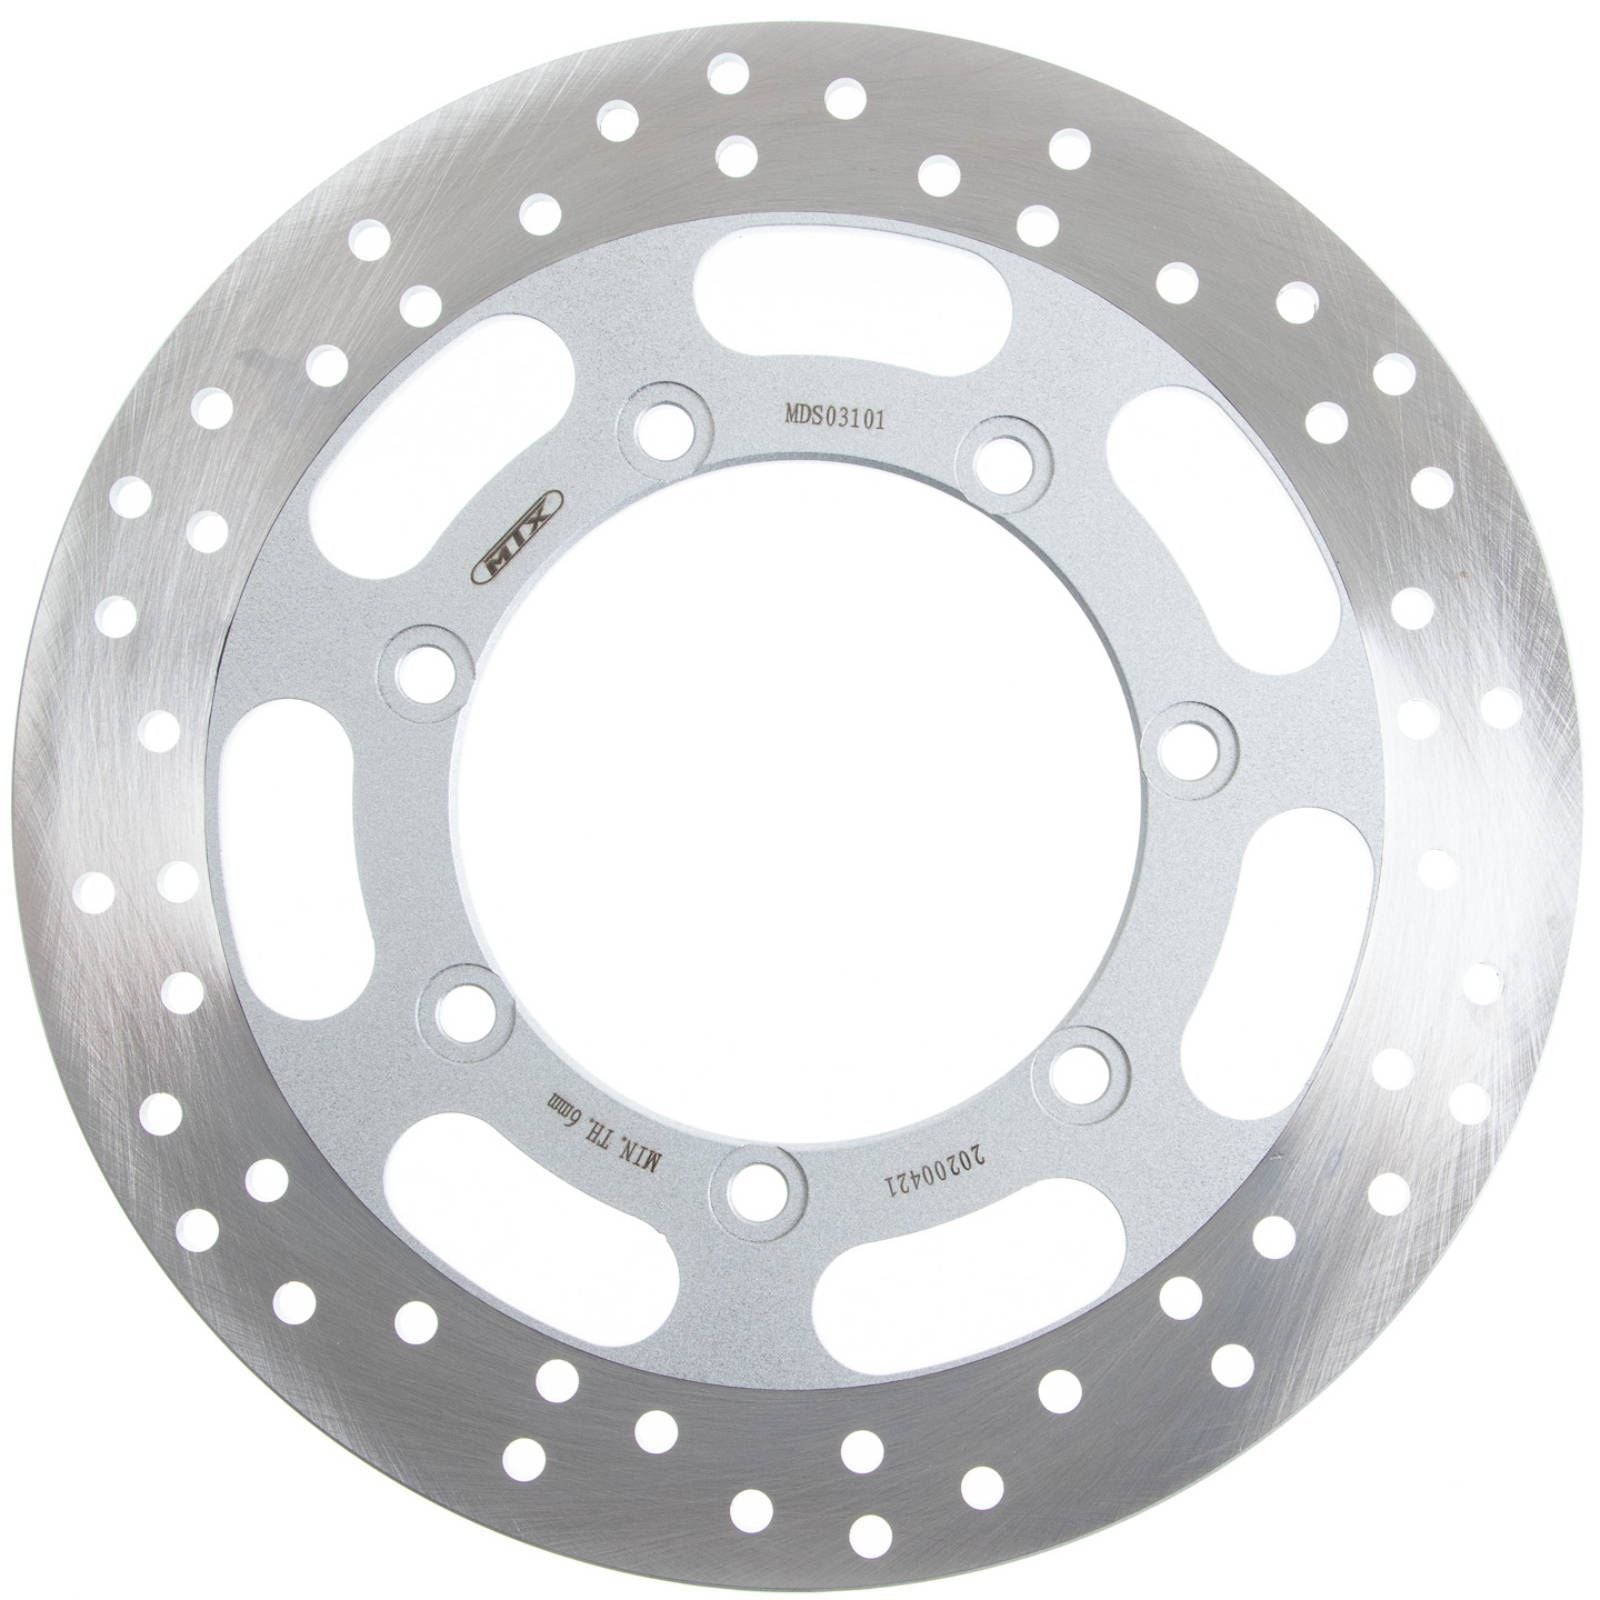 New MTX Brake Disc Rotor Solid Type - Rear #MDS03101